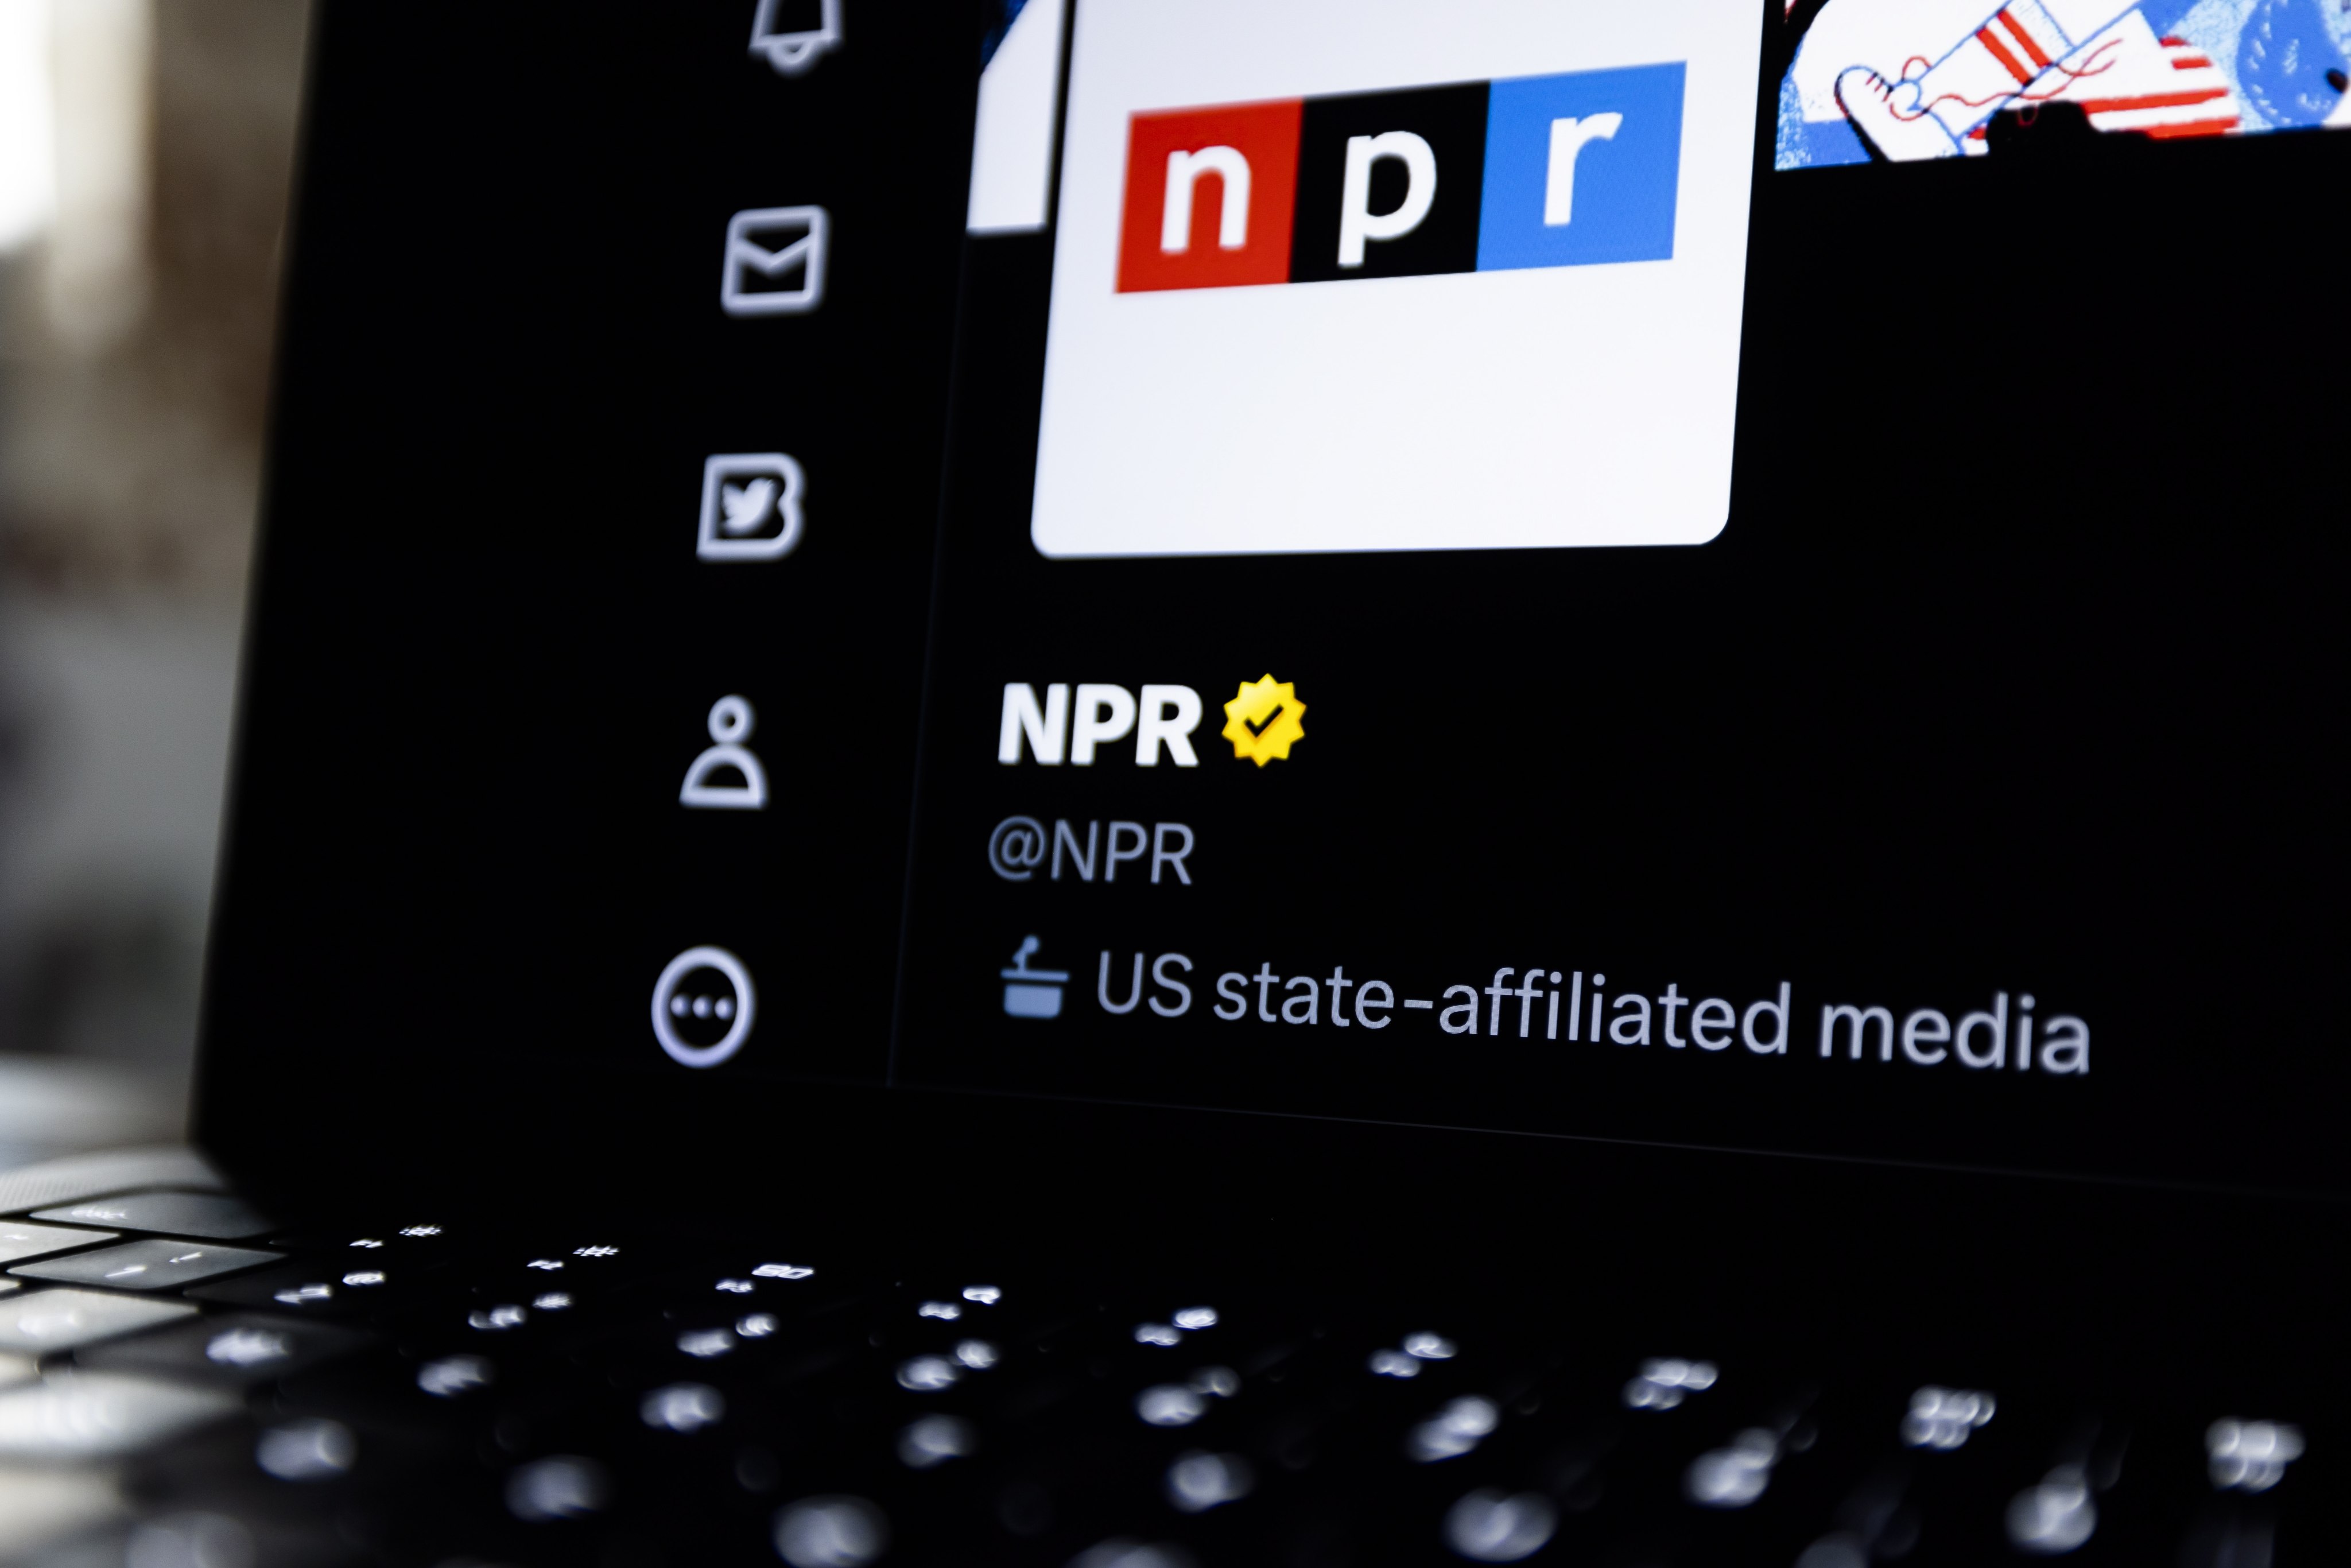 A computer screen shows the label ‘US state-affiliated media’ on the Twitter account of National Public Radio (NPR). Photo: EPA-EFE